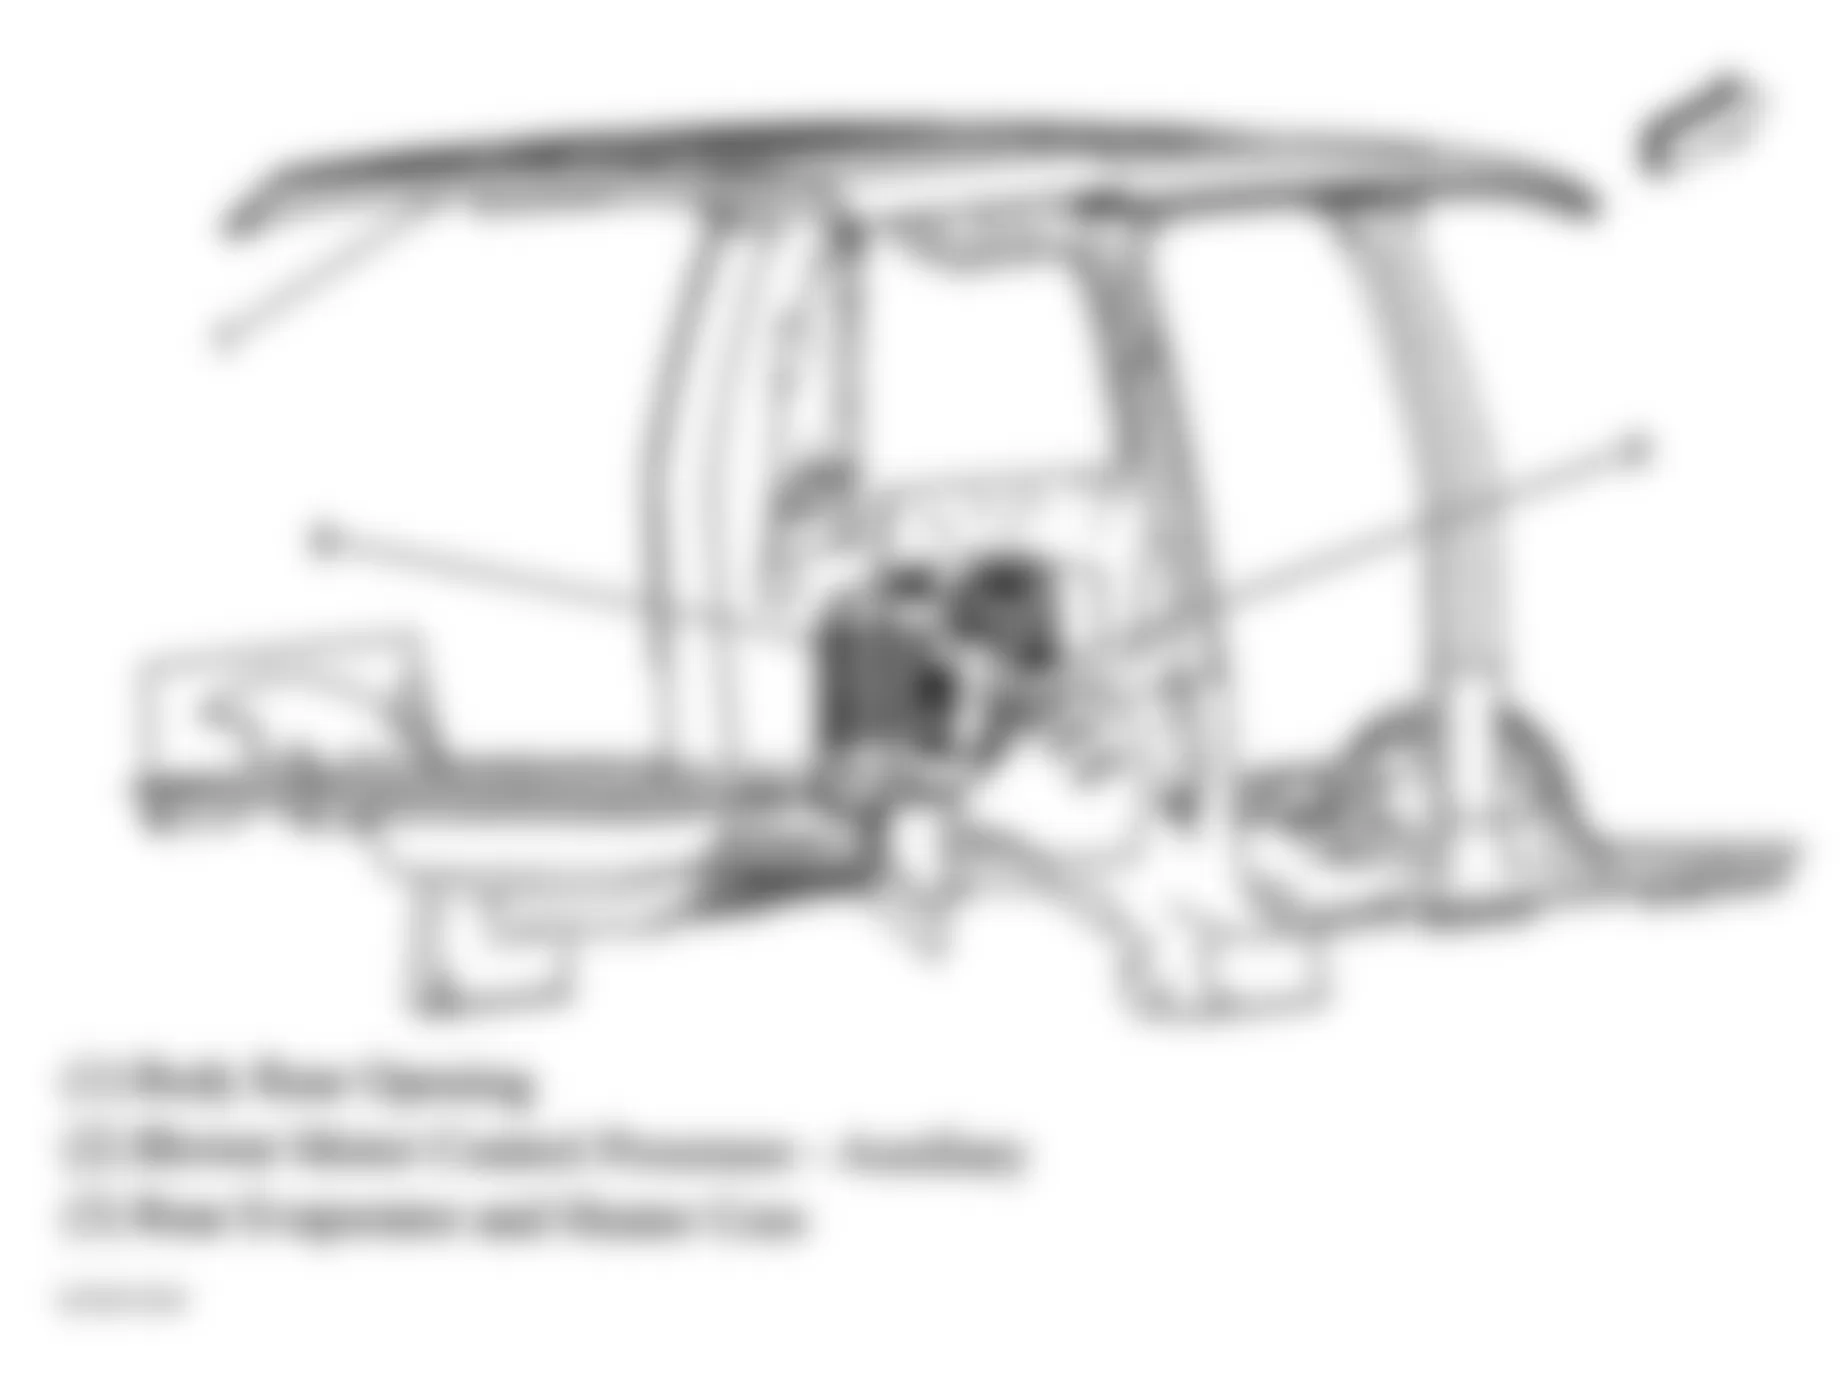 GMC Envoy XUV 2004 - Component Locations -  Right Rear Of Vehicle Chassis (Long Wheelbase, Except XUV)